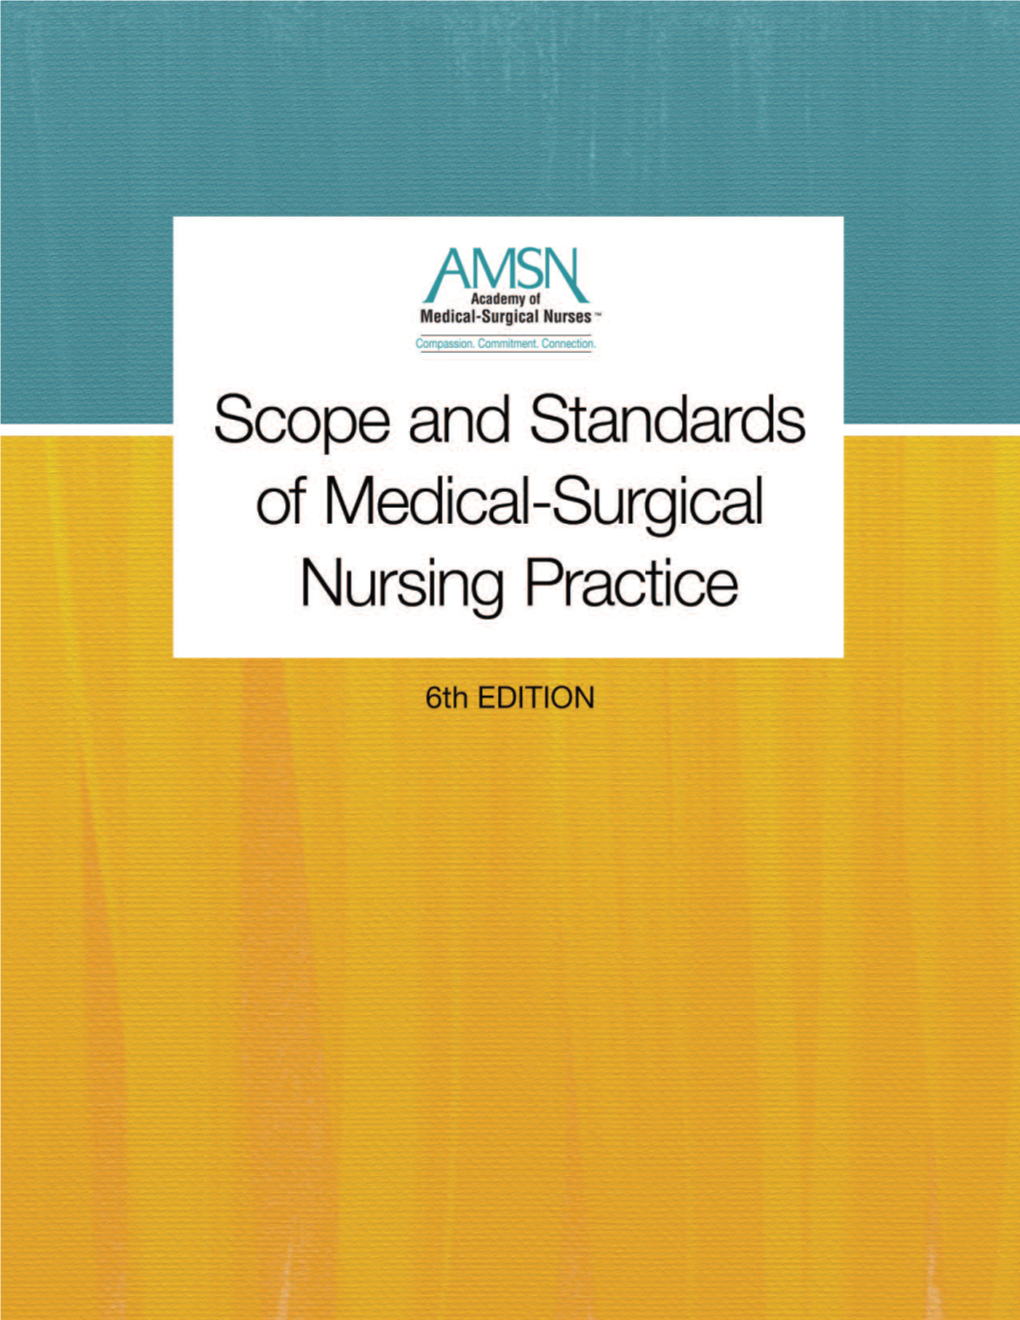 Scope and Standards of Medical-Surgical